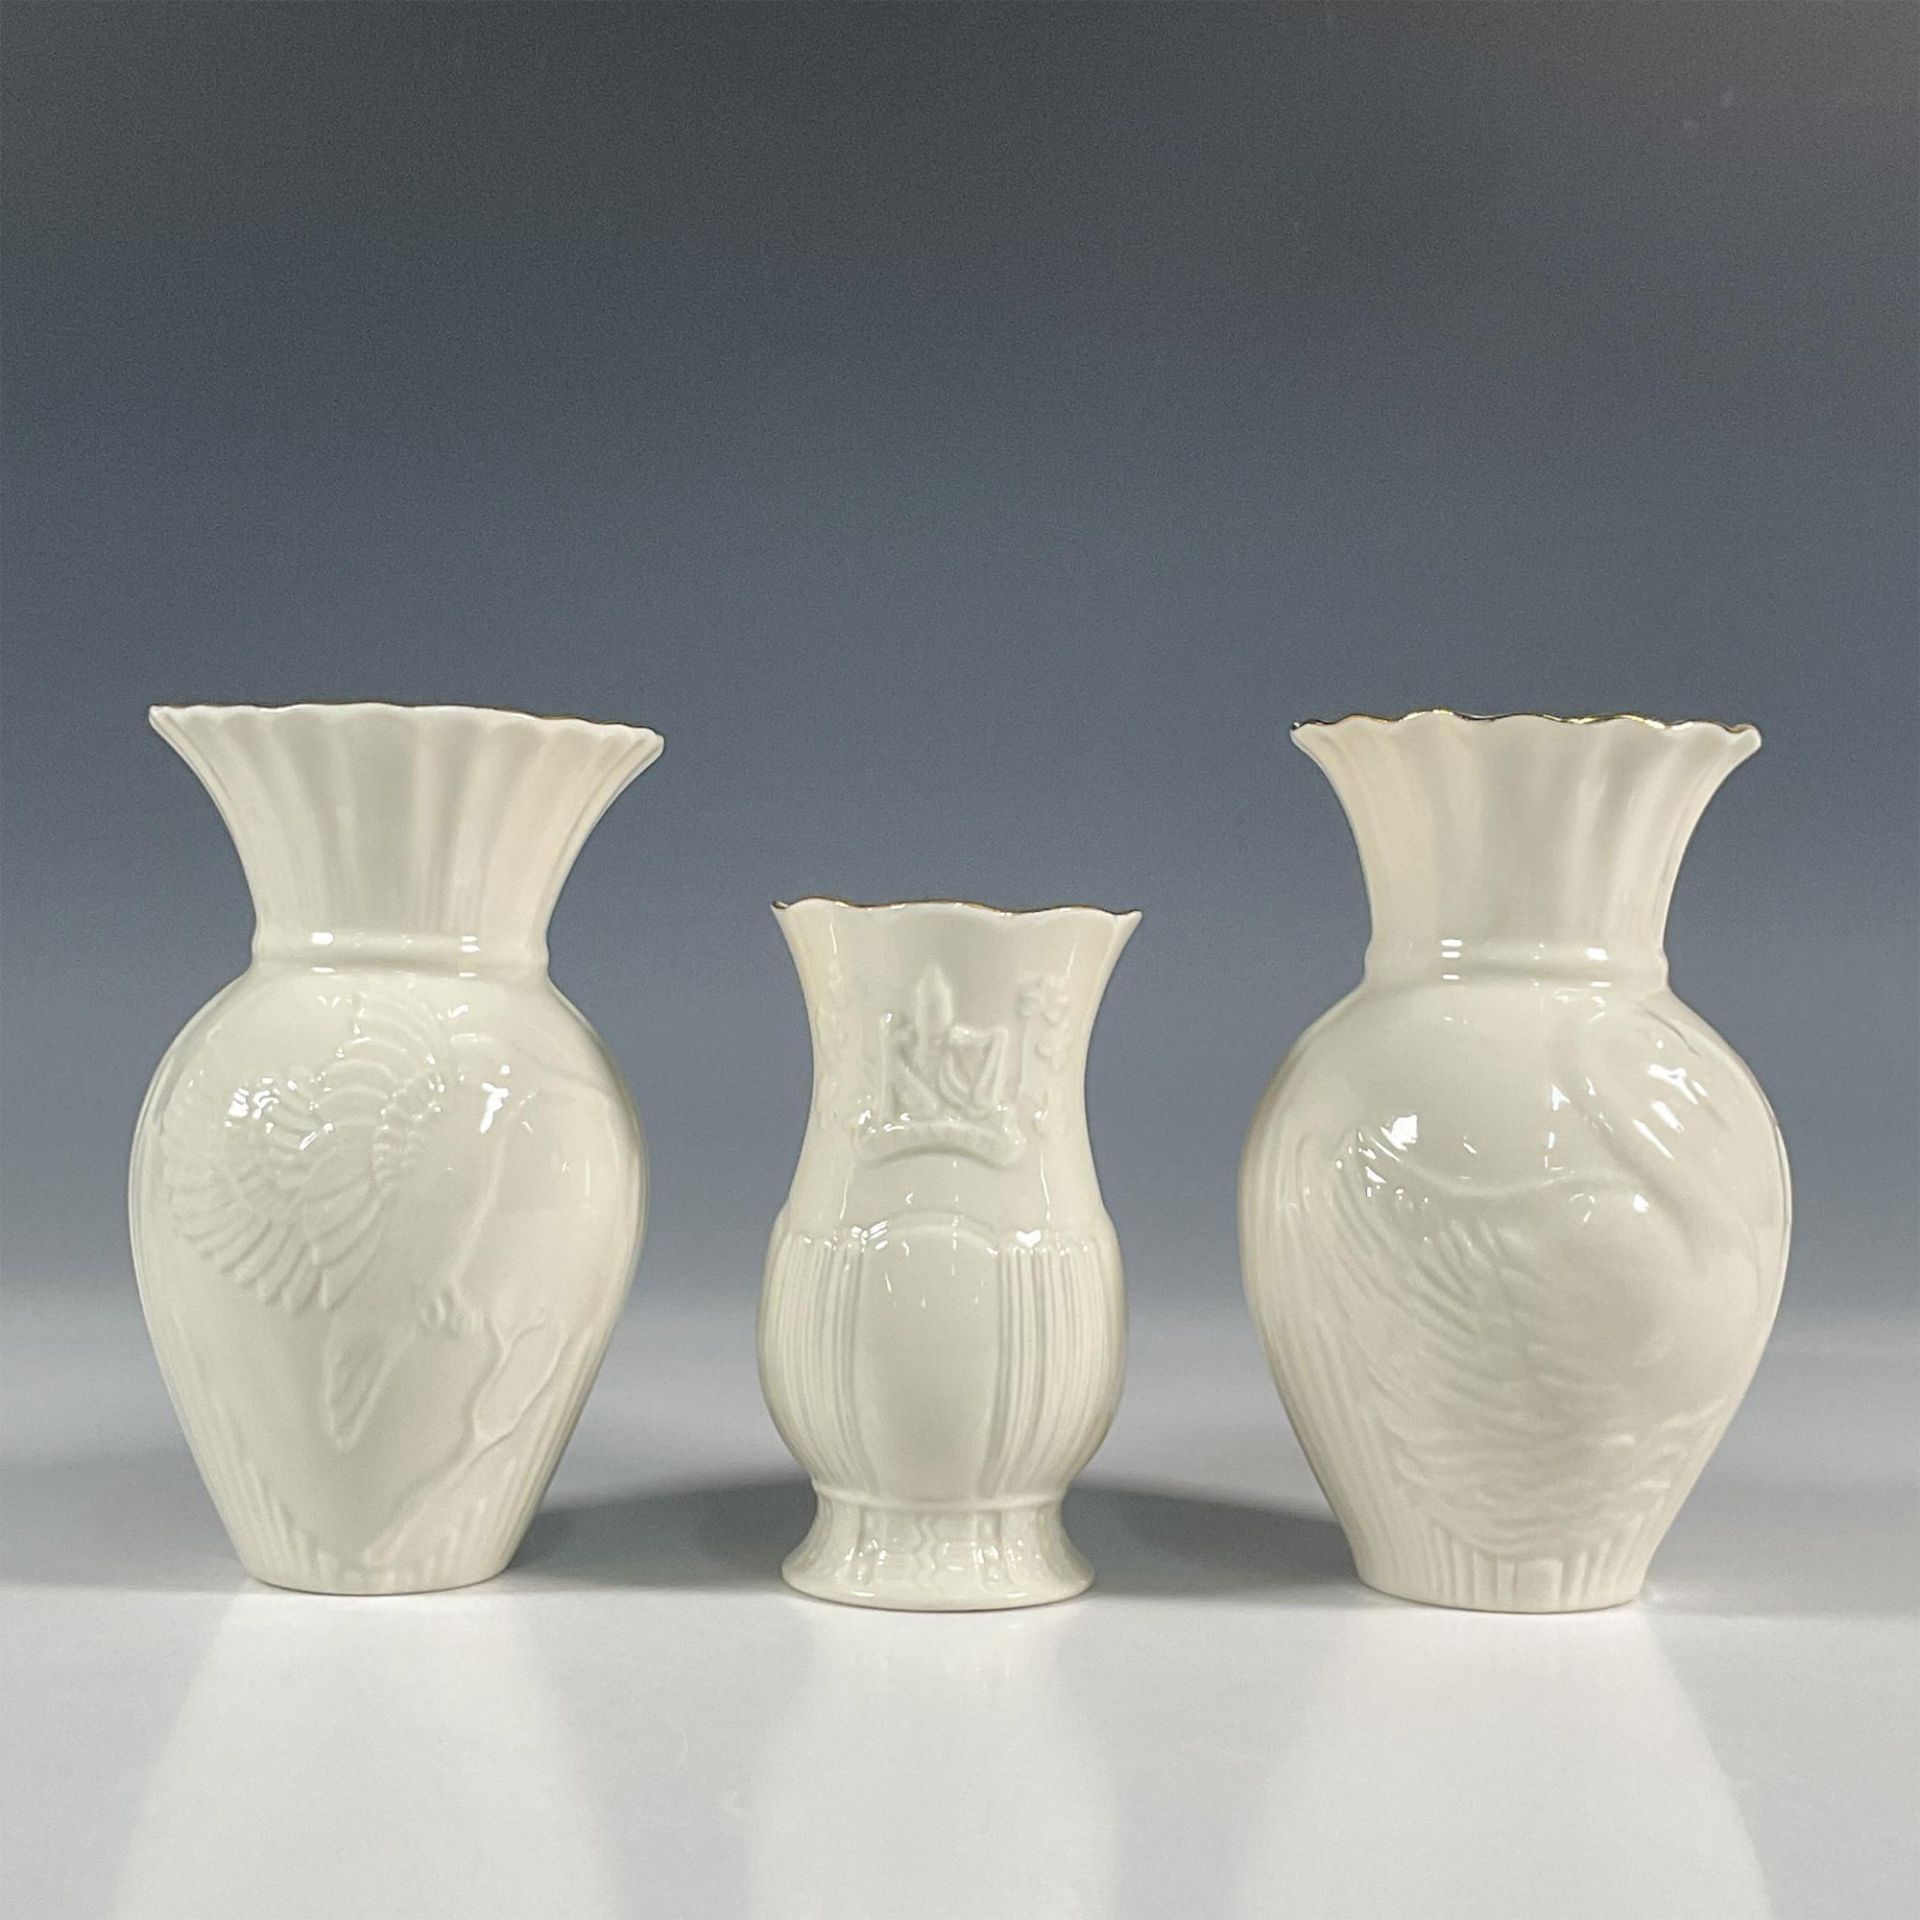 3pc Belleek Pottery Porcelain Collectors Society Vases - Image 2 of 3